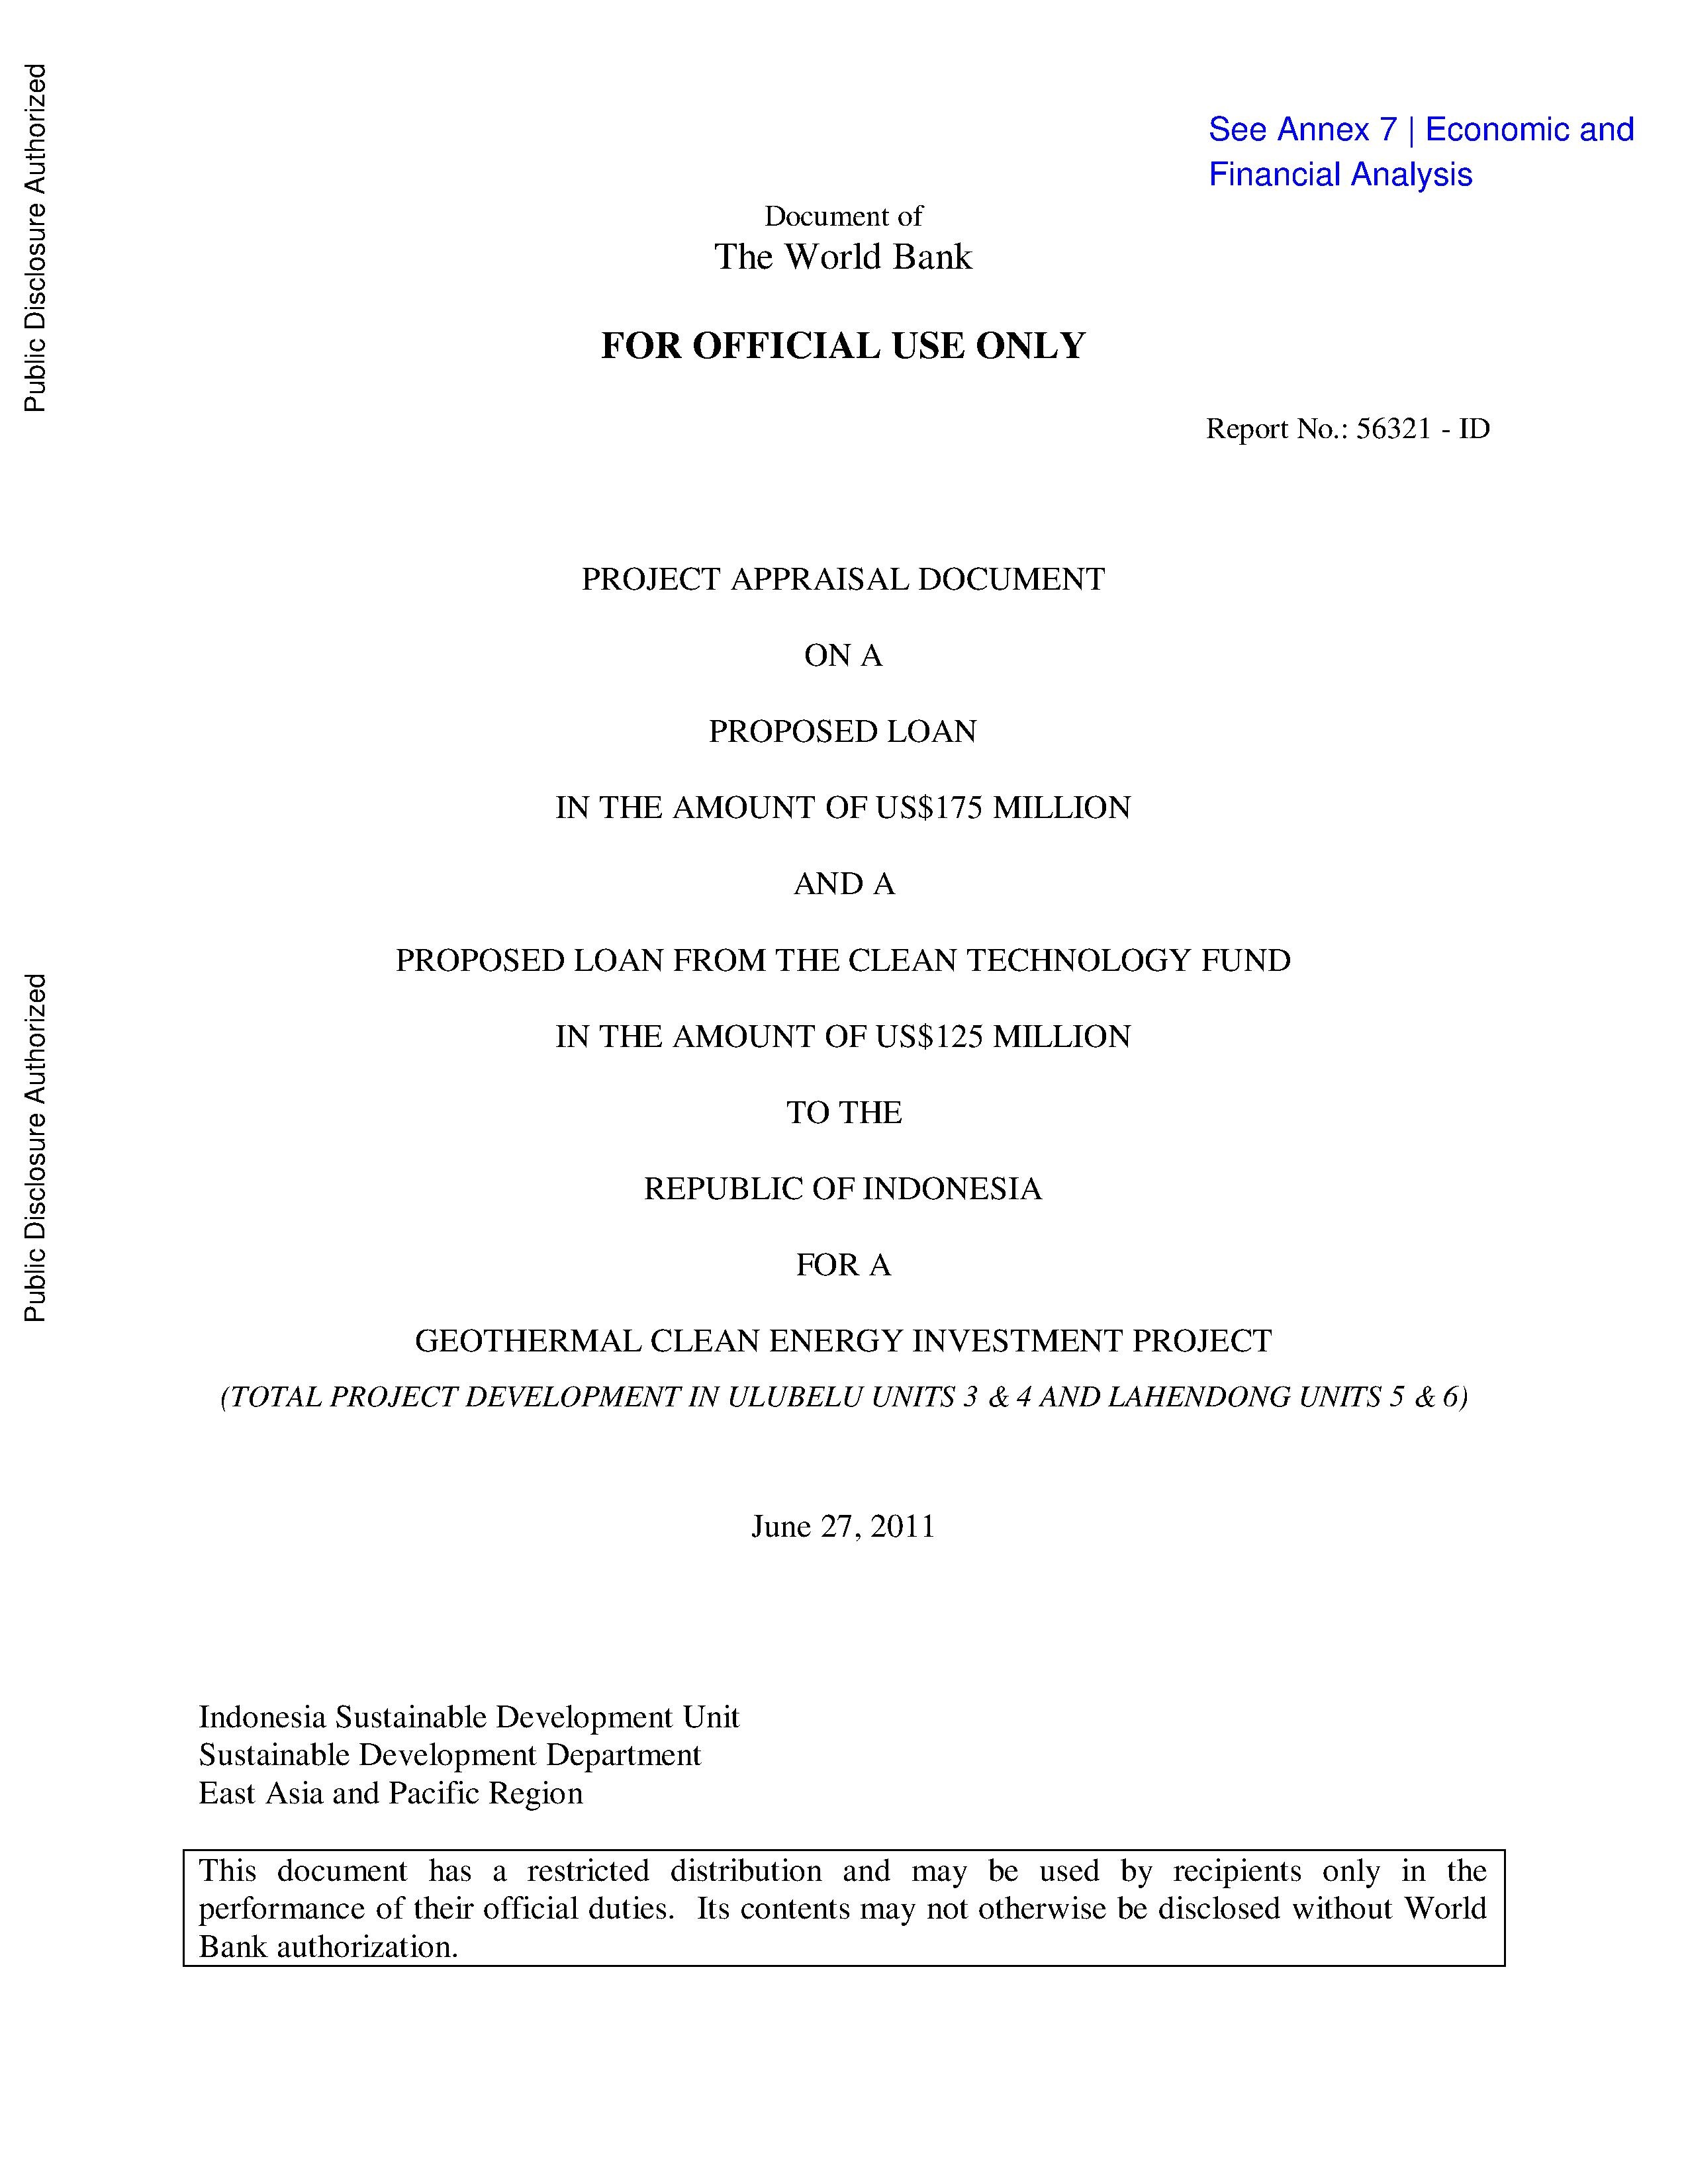 File:Indonesia Geothermal Clean Energy Investment Project E&FA.pdf